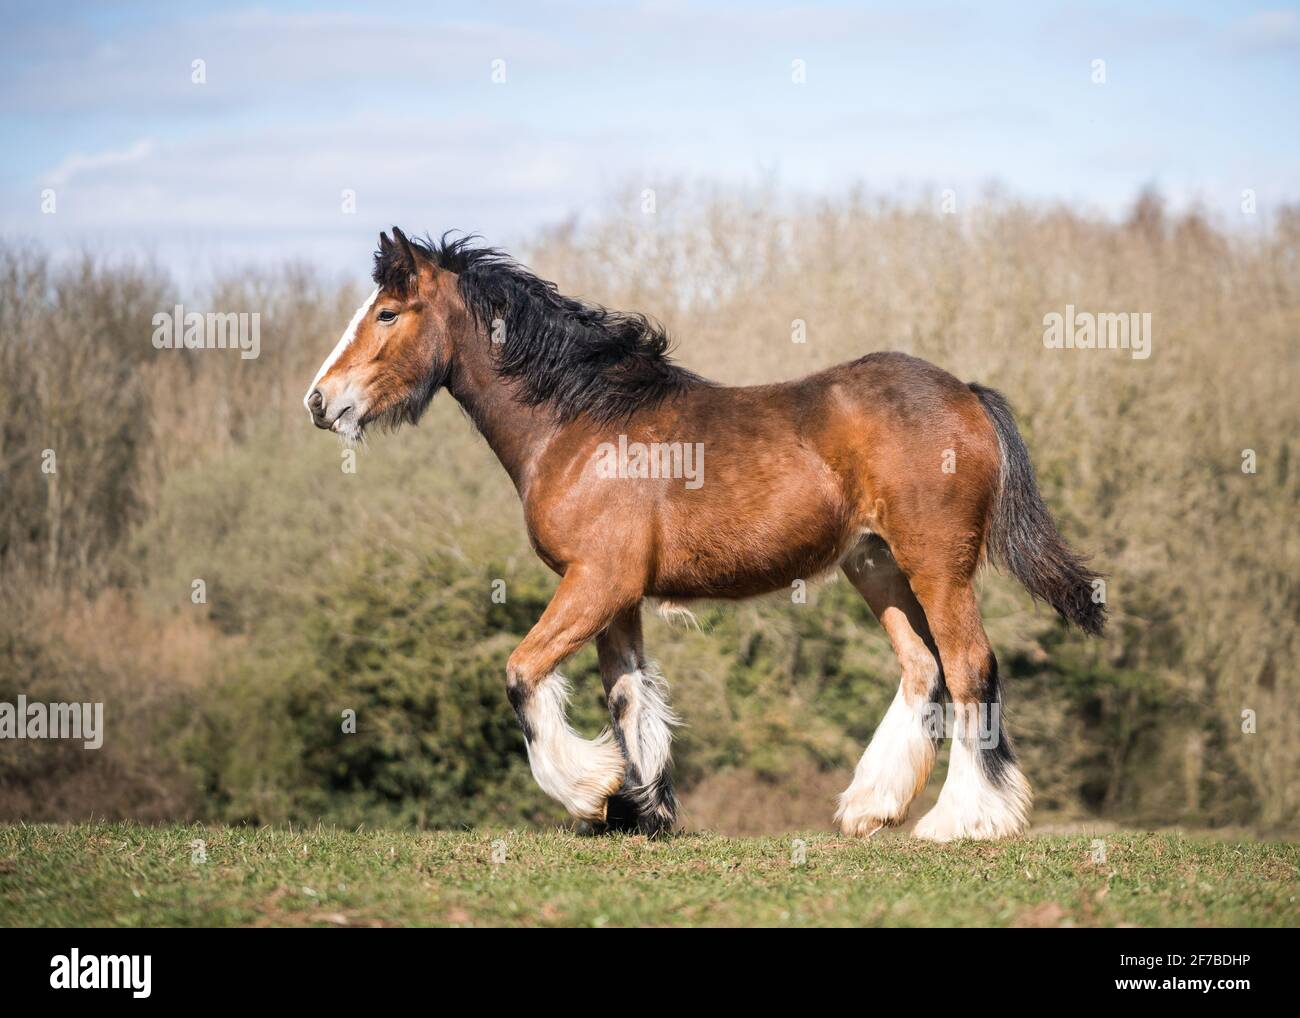 Big strong young bay Irish gypsey cob shire horse foal standing proud in sunshine countryside paddock field setting blue sky and green grass. Stock Photo